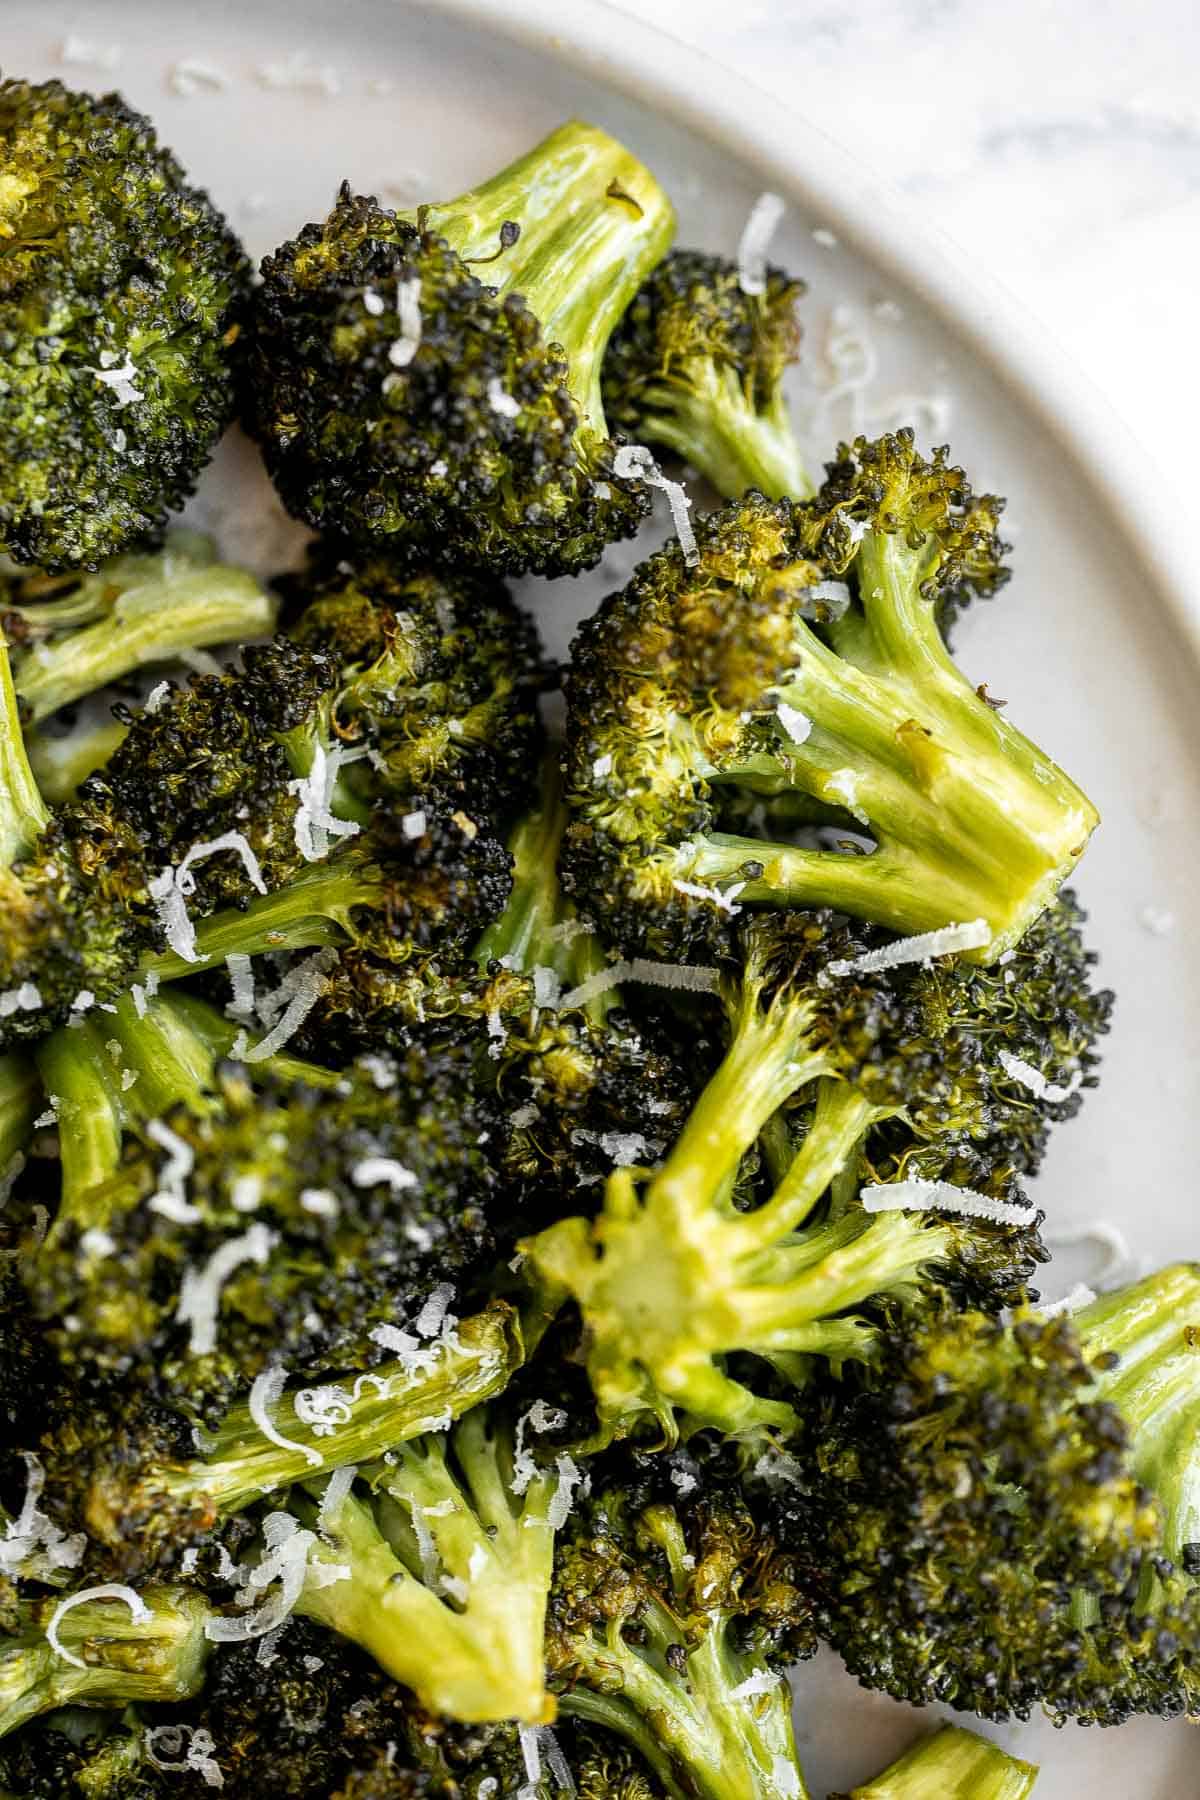 Quick and easy air fryer broccoli is a healthy side dish that takes just six minutes to cook in the air fryer. It's crispy, delicious, and flavorful. | aheadofthyme.com